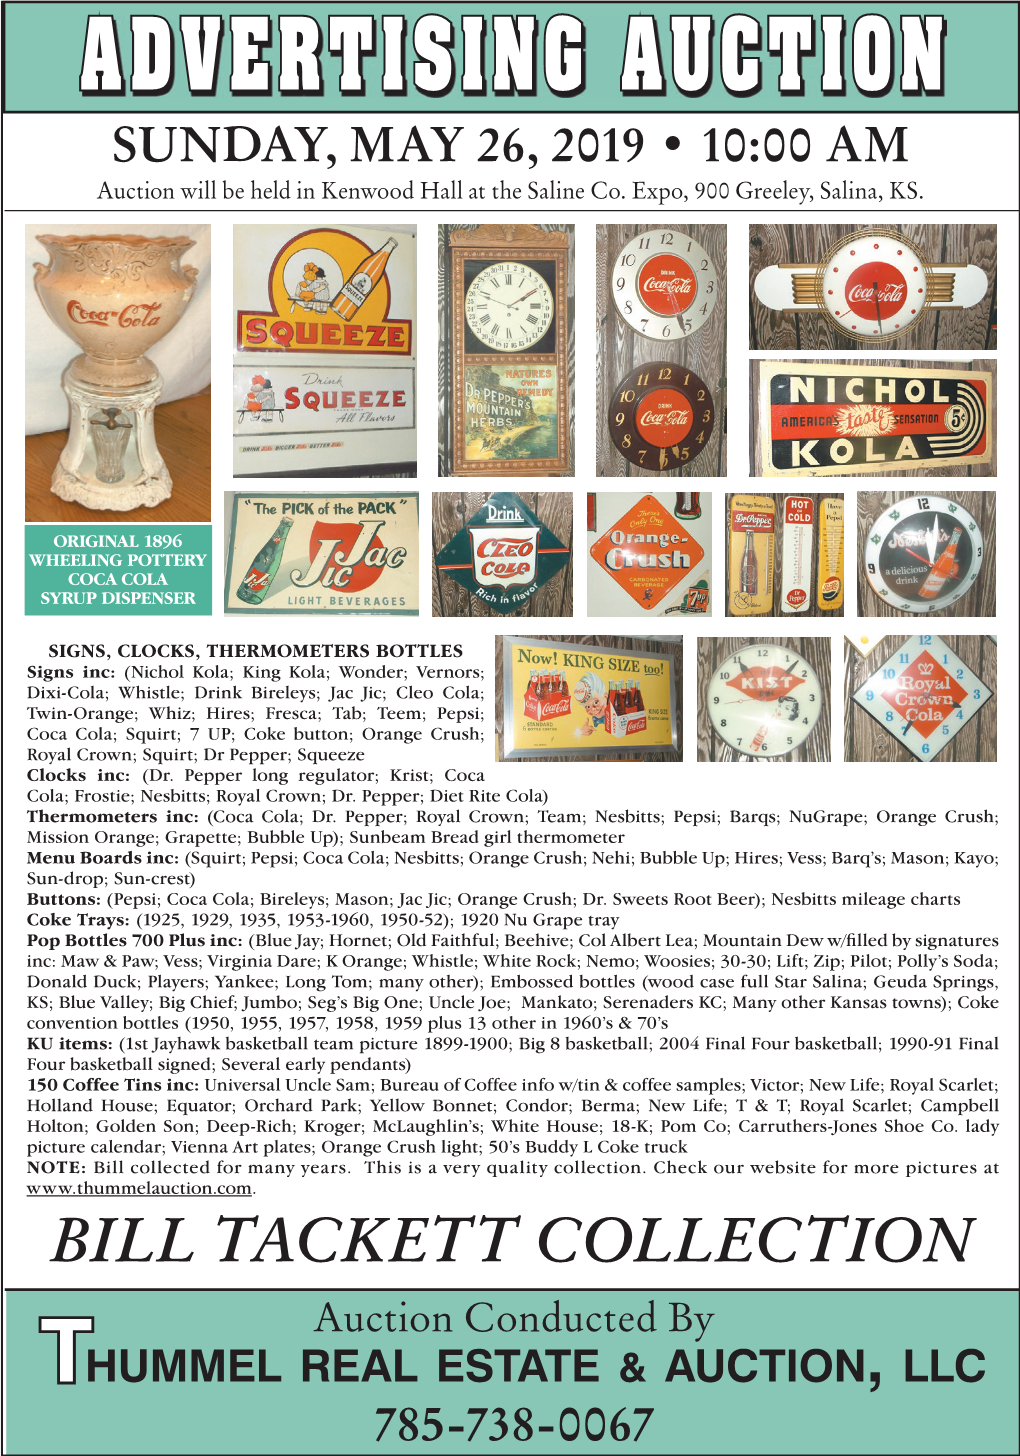 ADVERTISING AUCTION SUNDAY, MAY 26, 2019 • 10:00 AM Auction Will Be Held in Kenwood Hall at the Saline Co